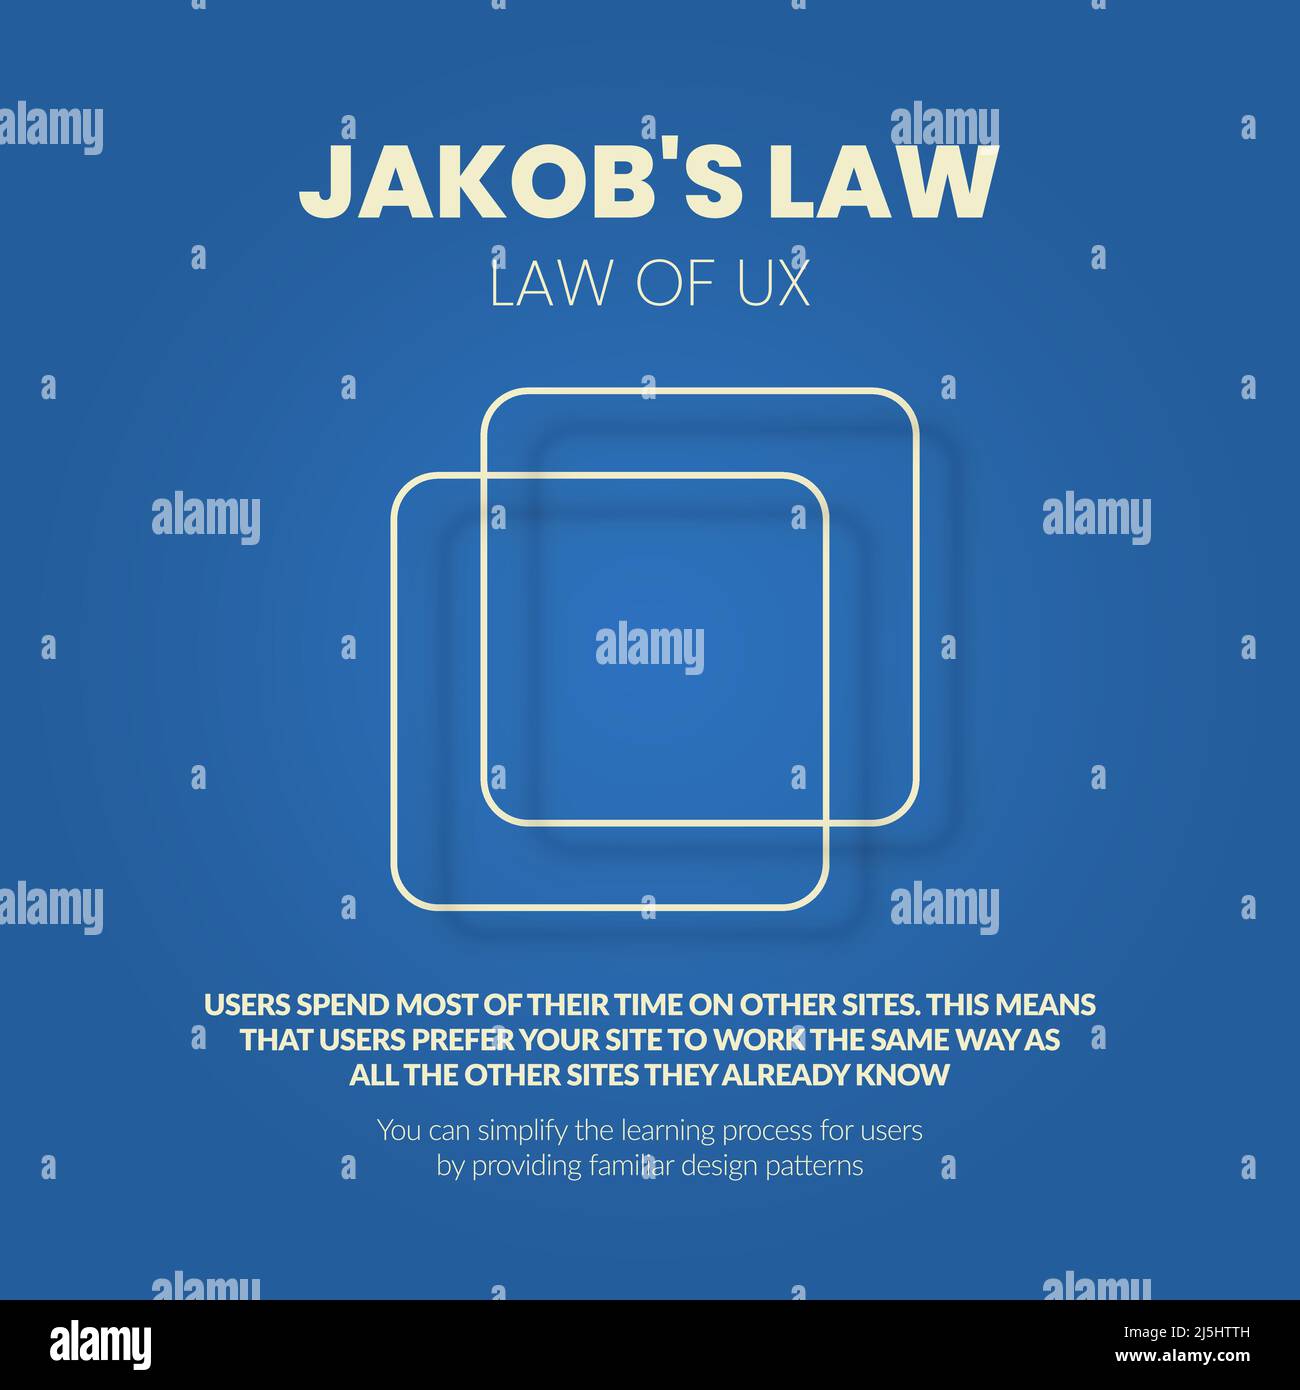 A vector illustration of Jakob Nielsen’s laws and rules that govern fields of Web Design, User Experience (UX), and User Interface (UI) design with hu Stock Vector